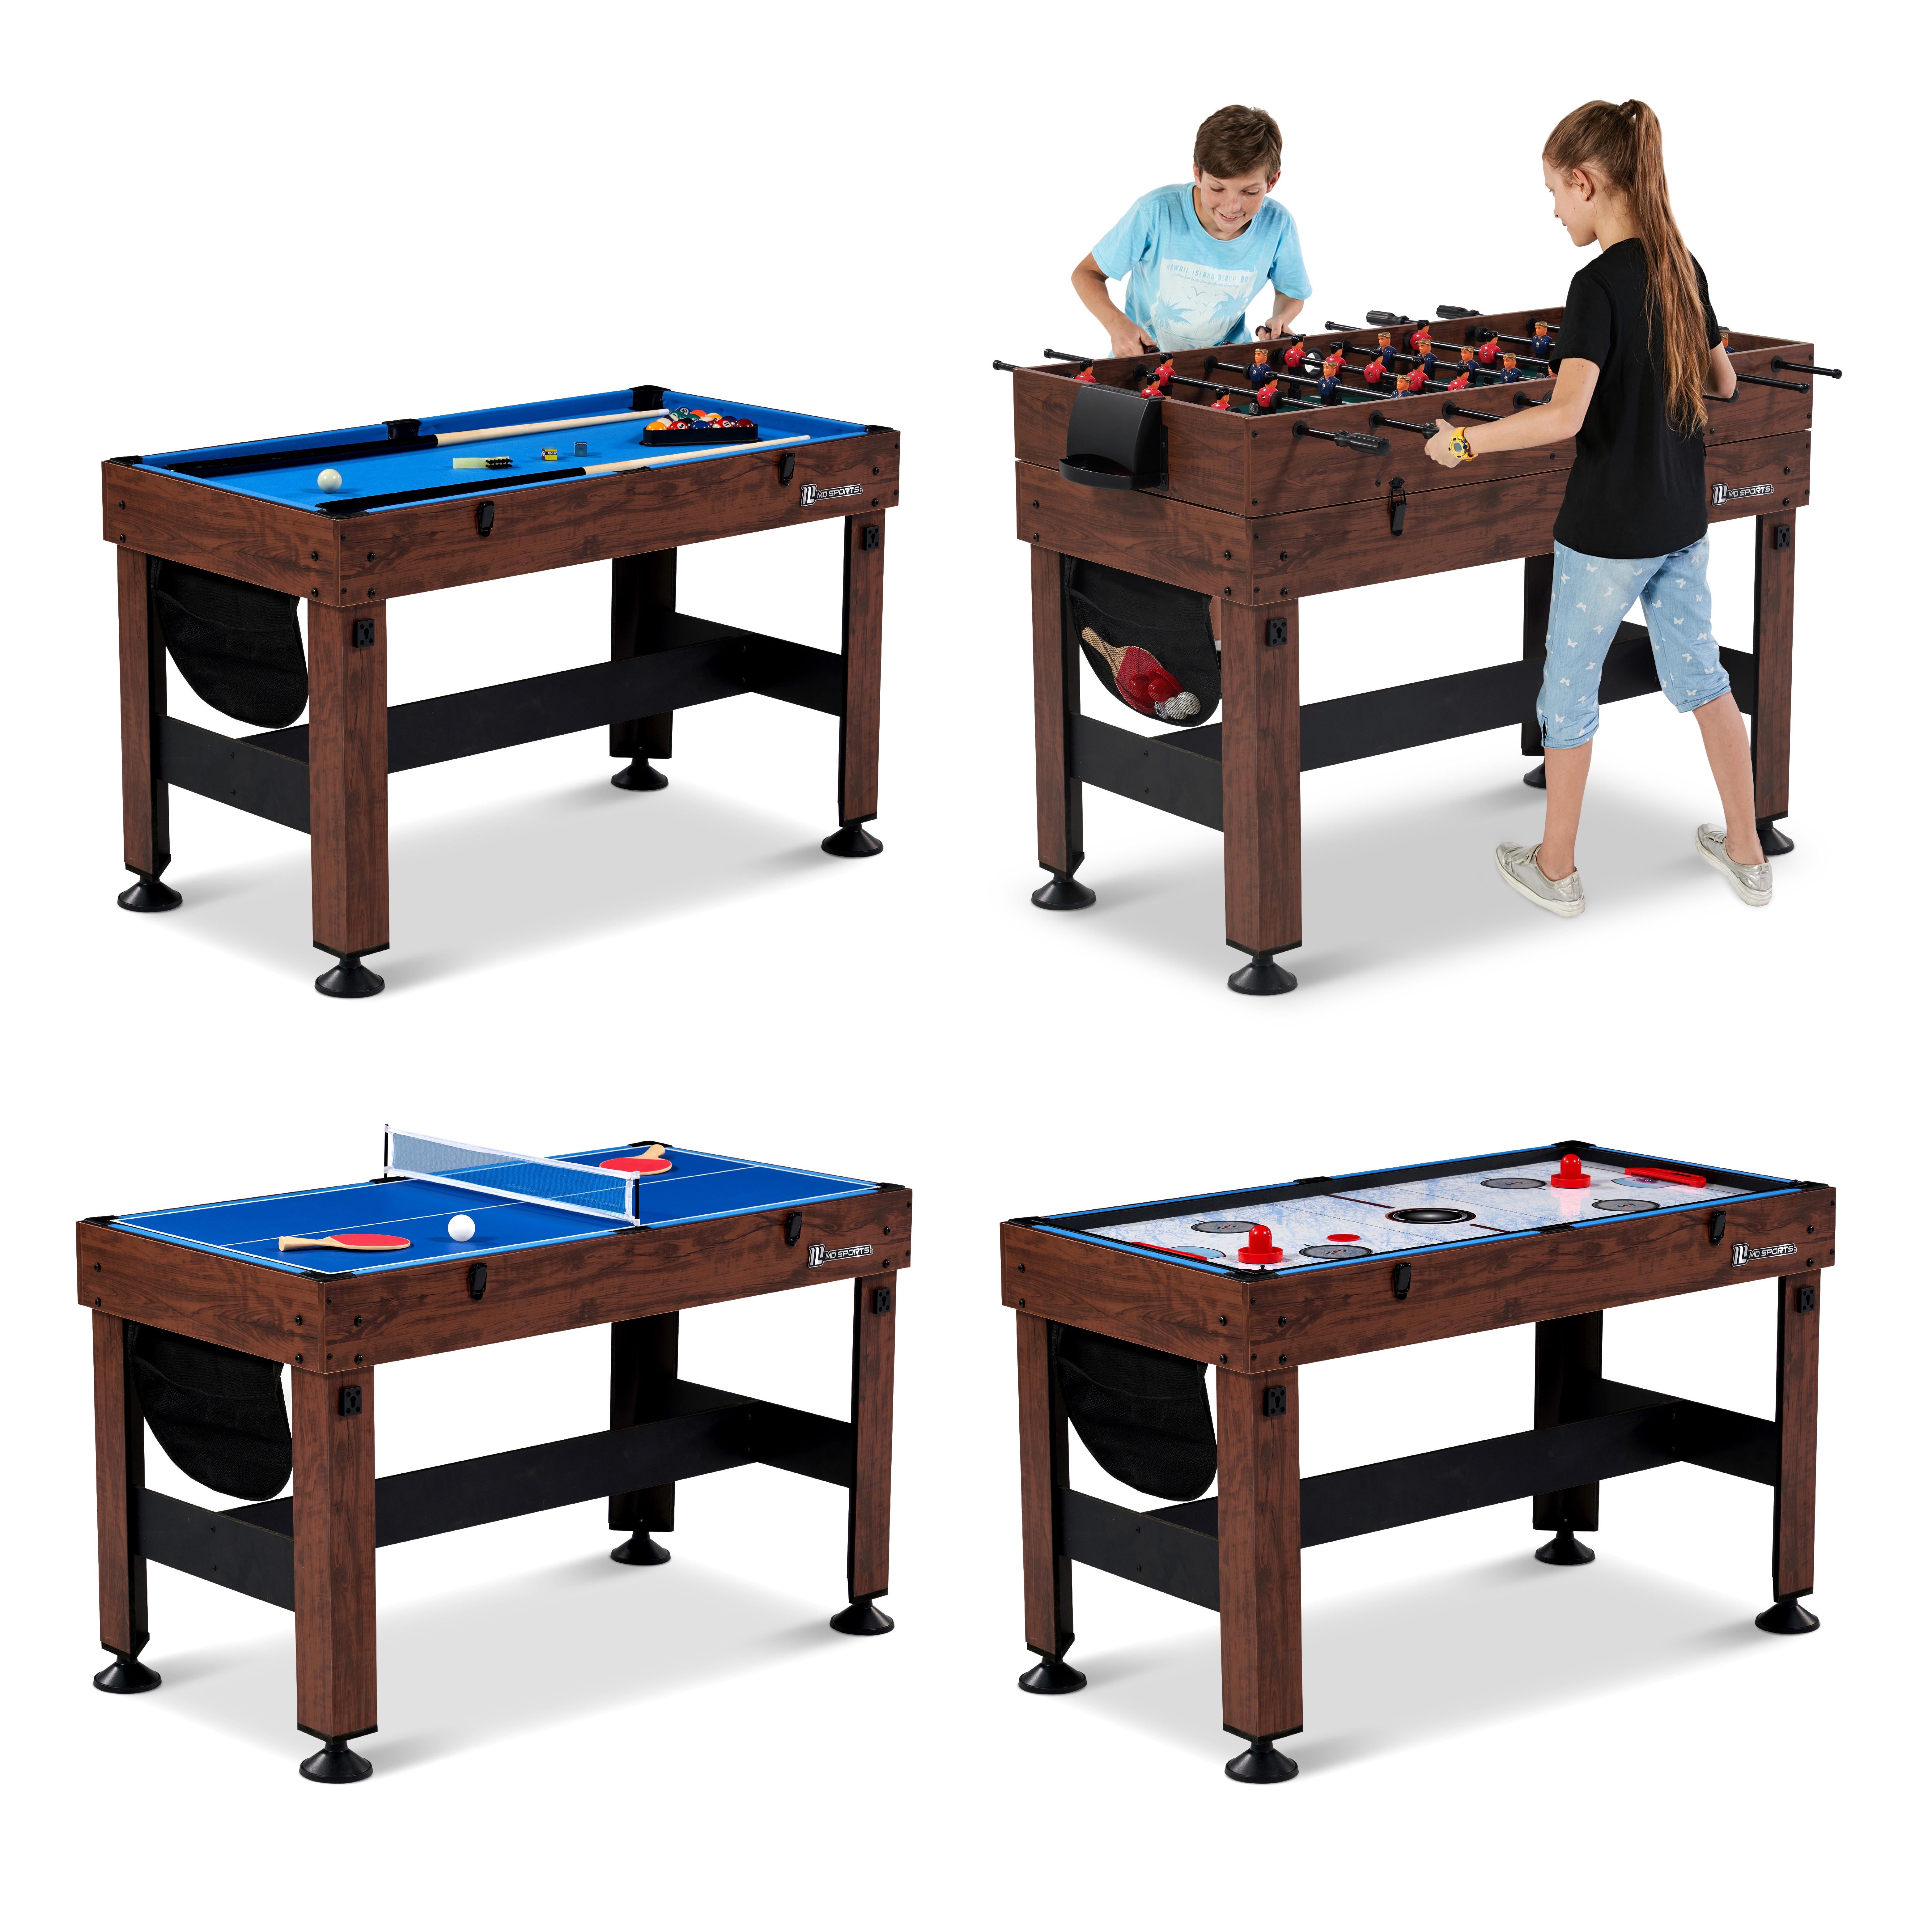 MD Sports 48 Inch 12 in 1 Combo Manual Scoring System Multi Game Room Table 